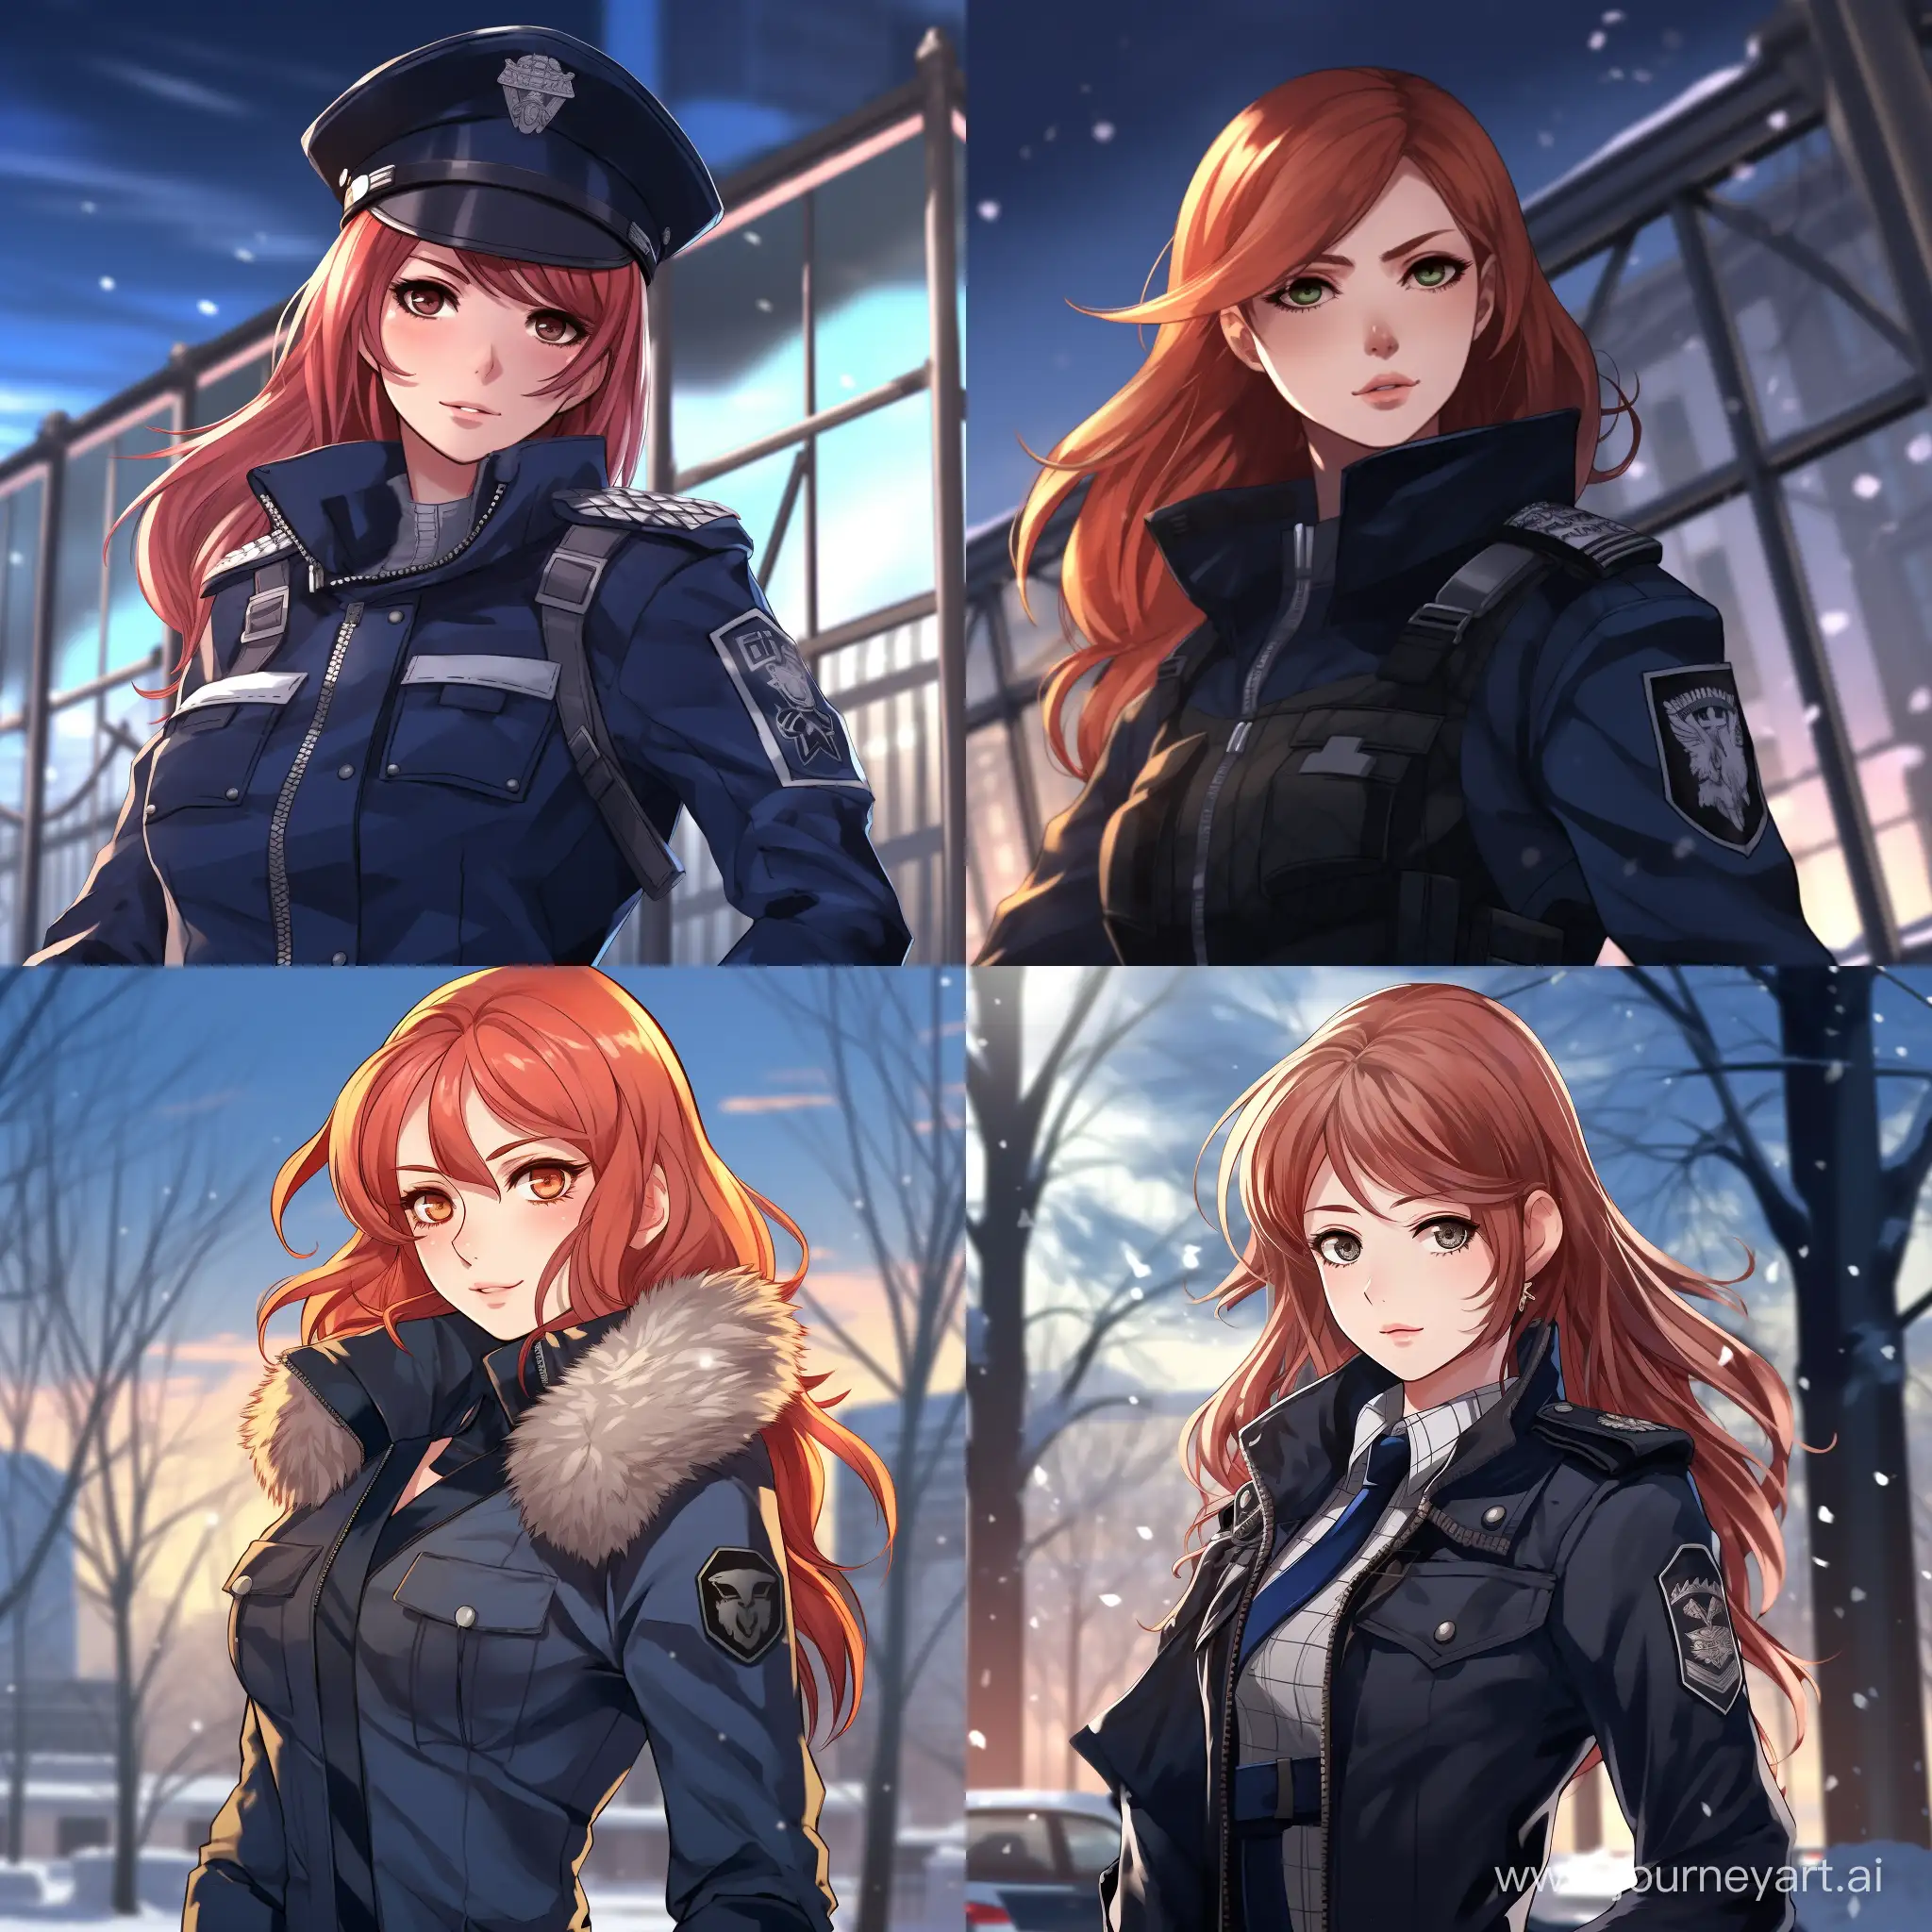 RedHaired-Anime-Police-Officer-in-Winter-Scene